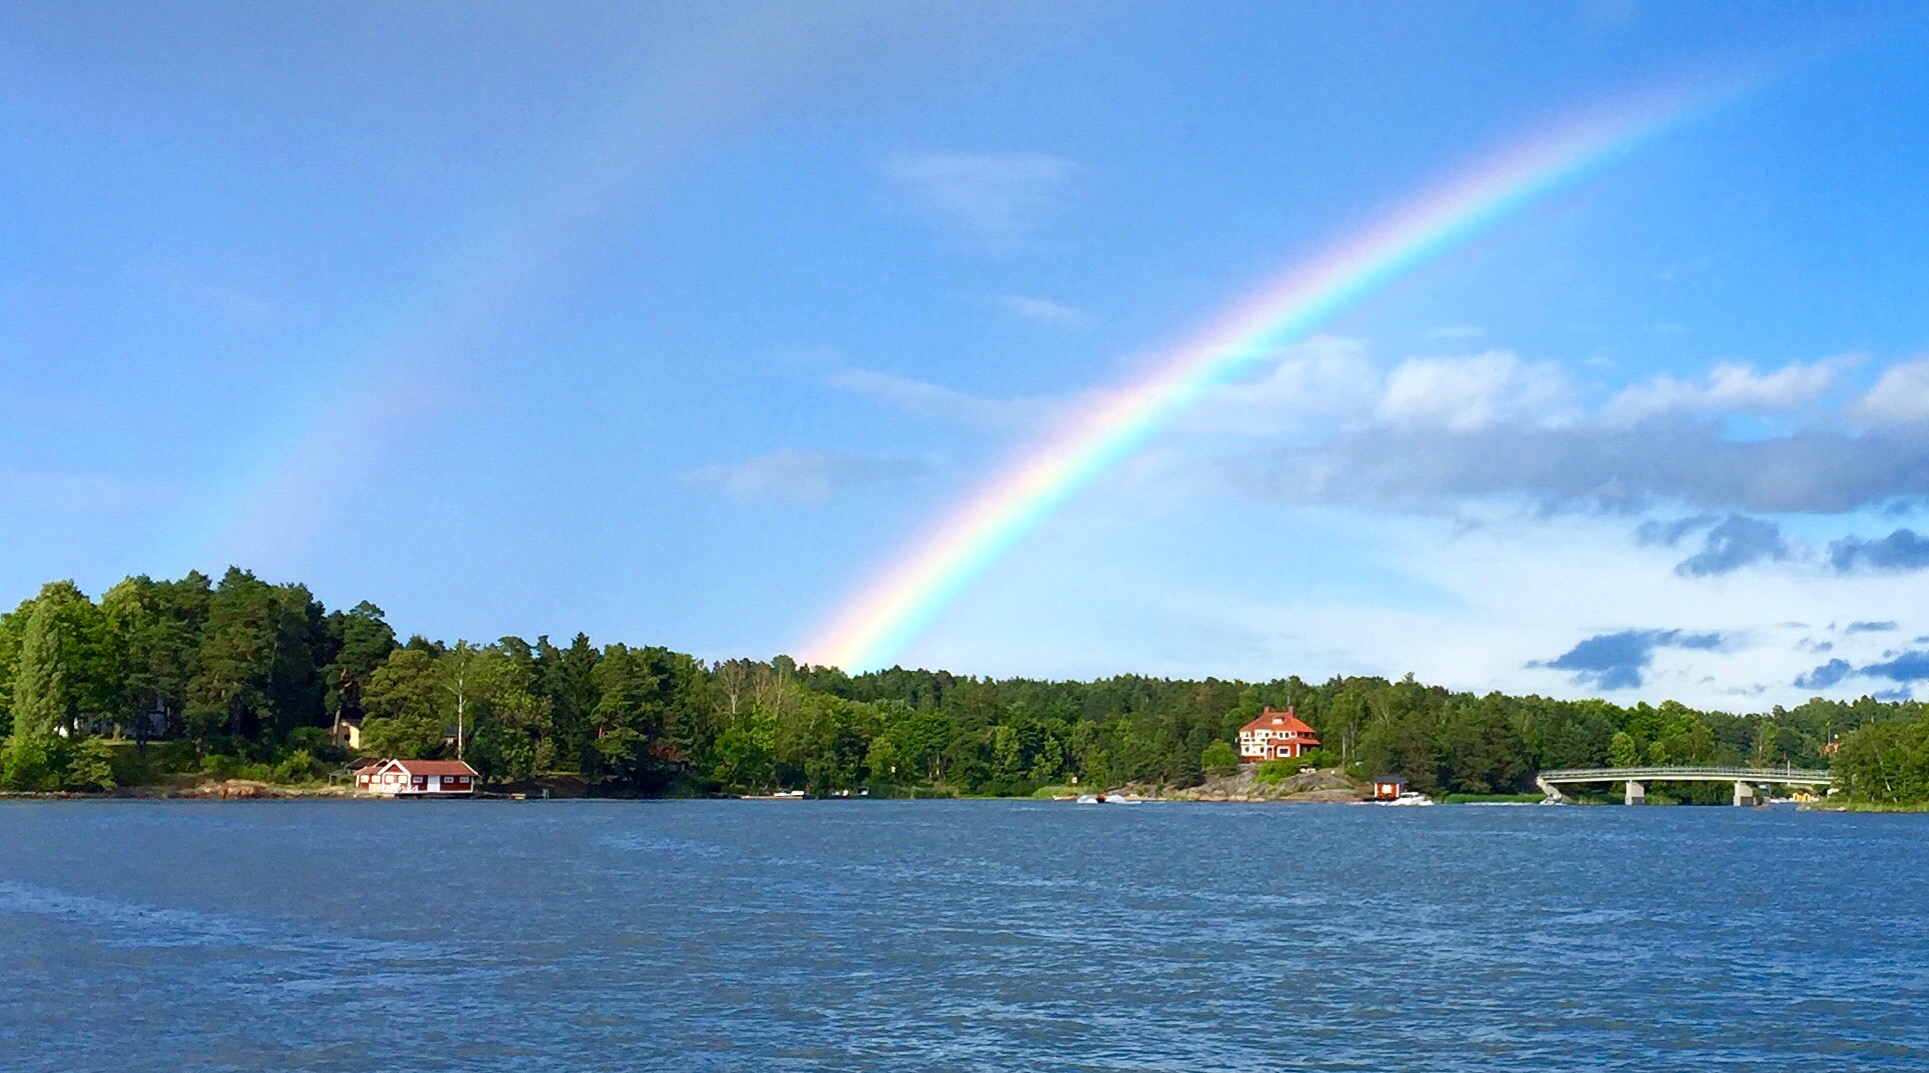 Stockholm archipelago view with double rainbow